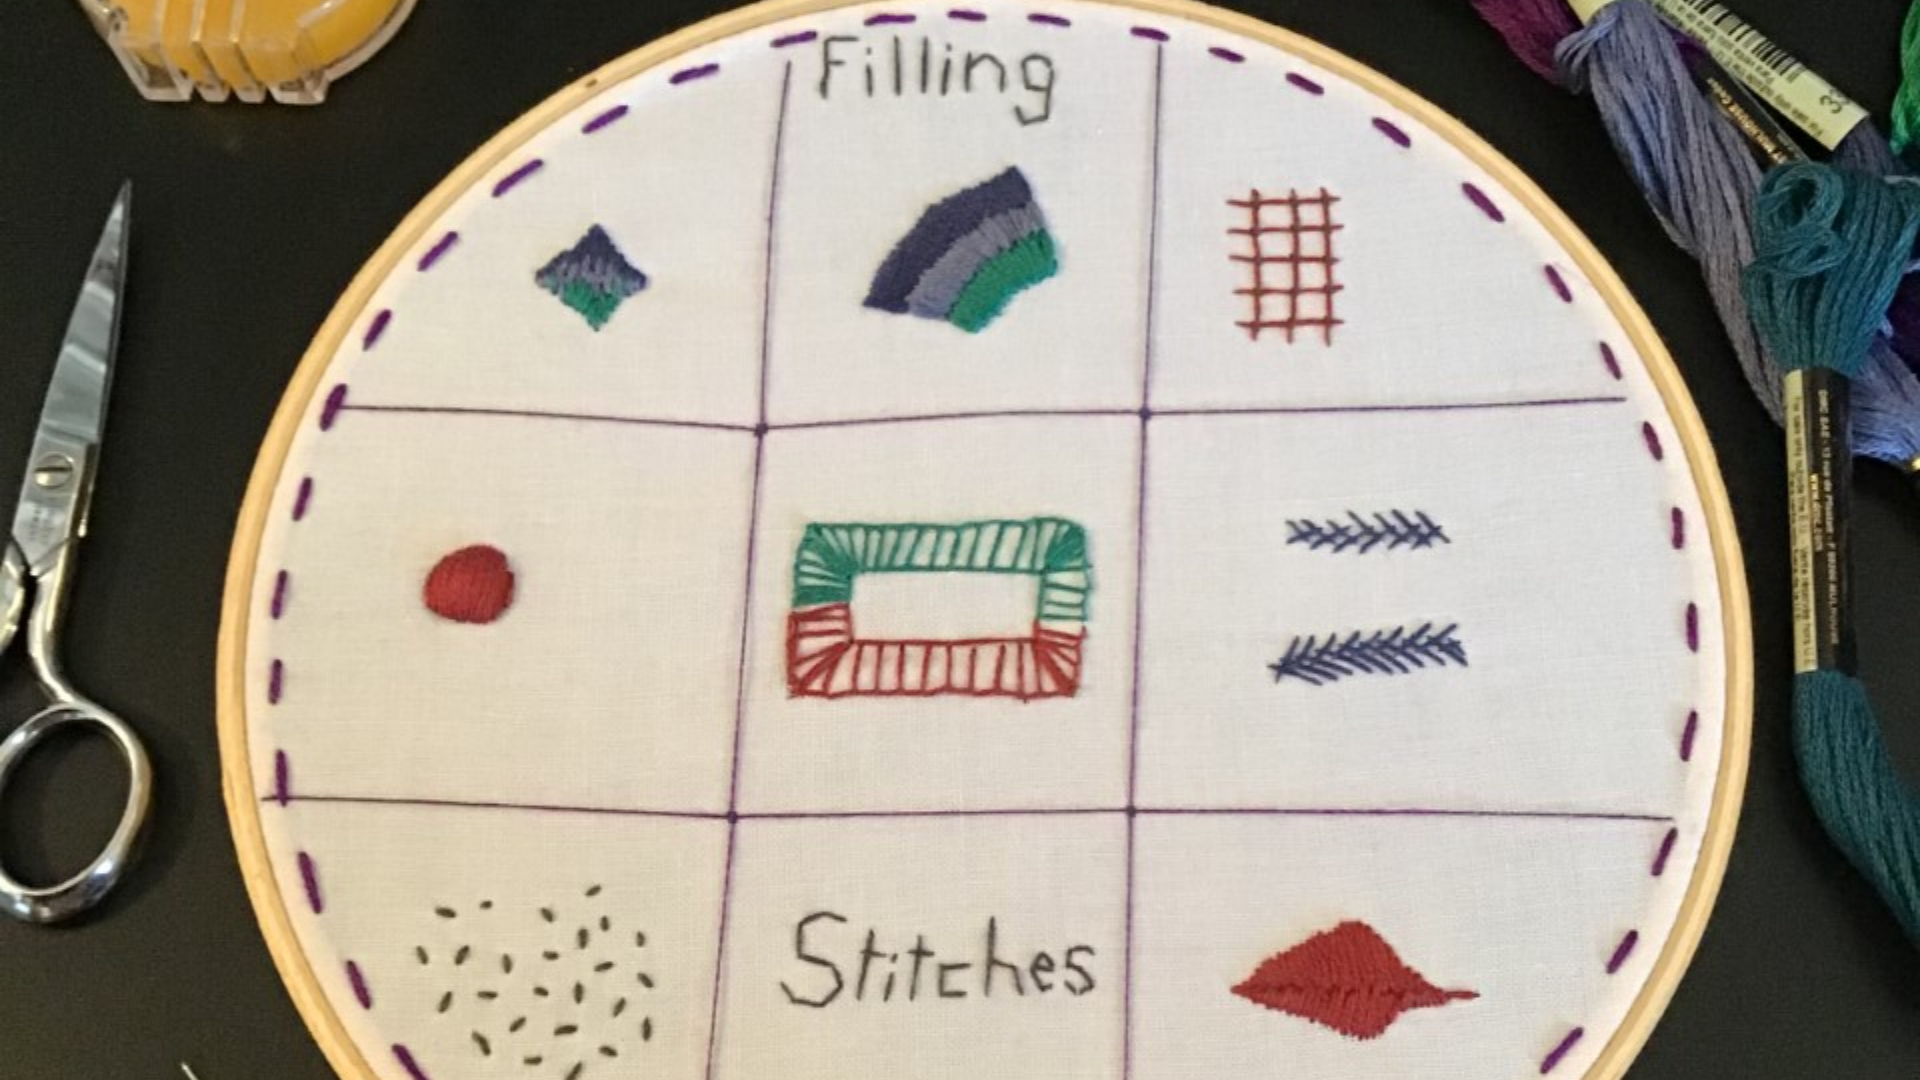 FB Filling Stiches Embroidery 